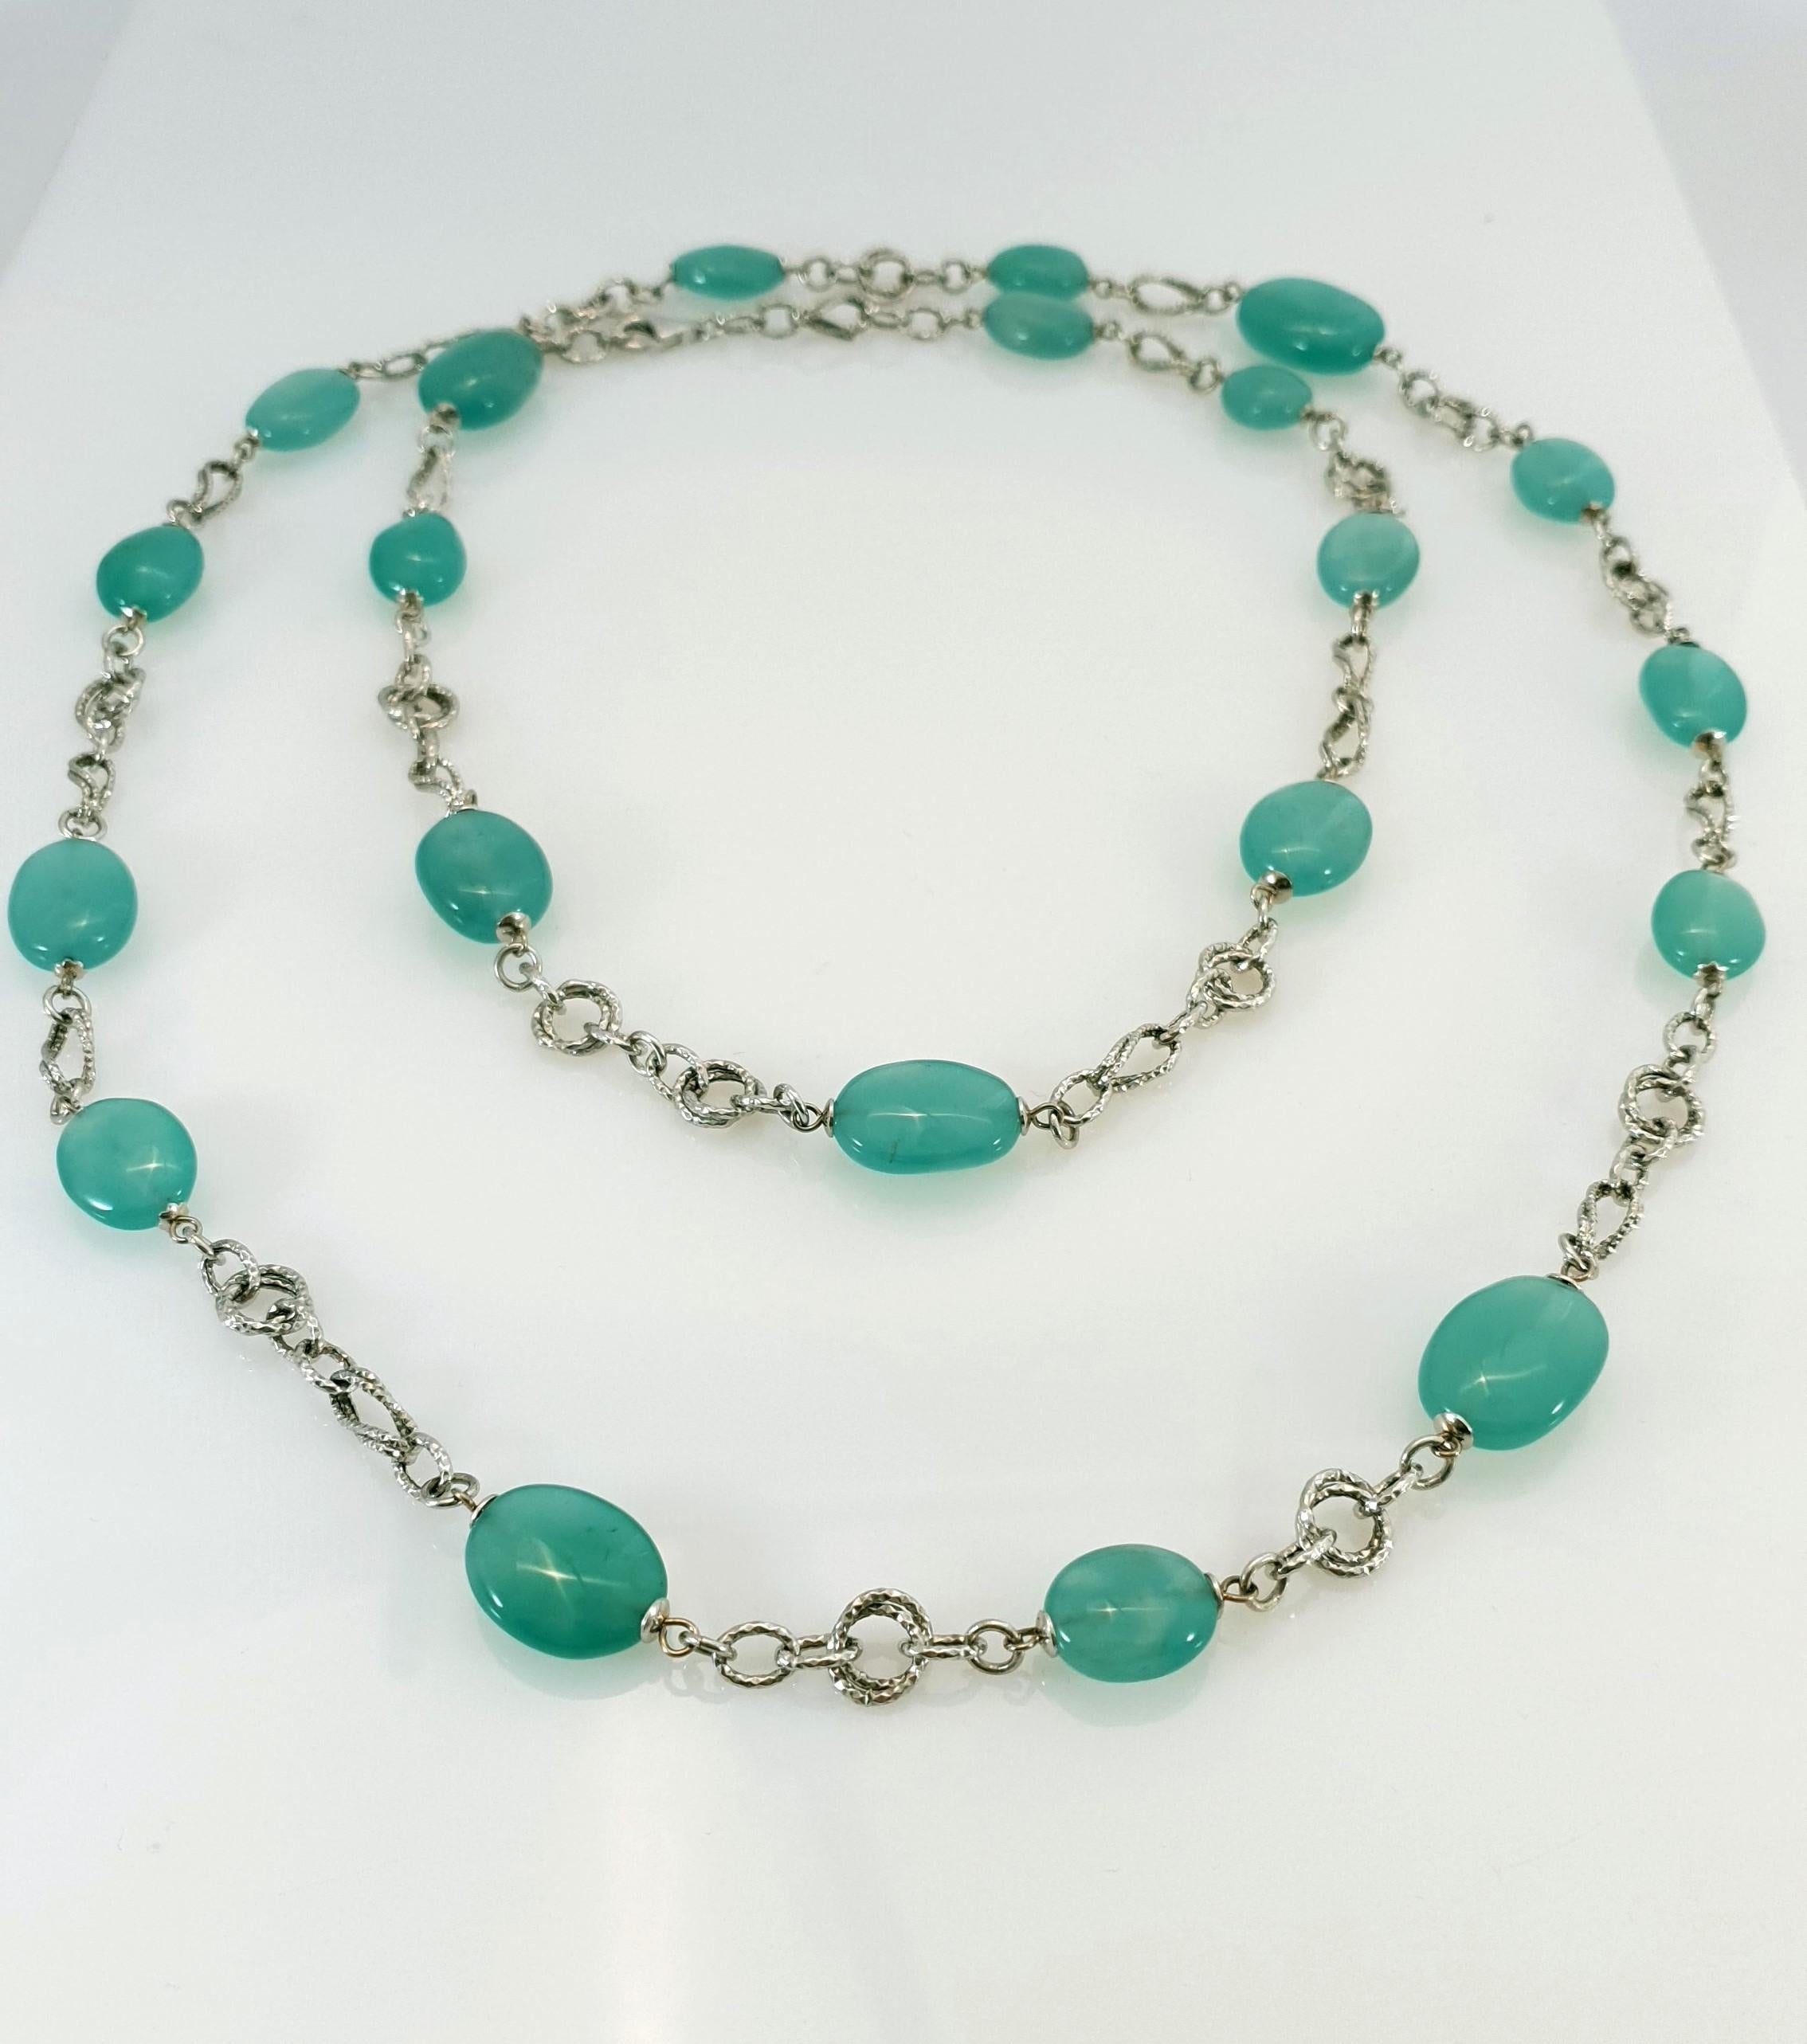 Green Chalcedony Baroque Bead Necklace with 18 Carat White Gold For Sale 6